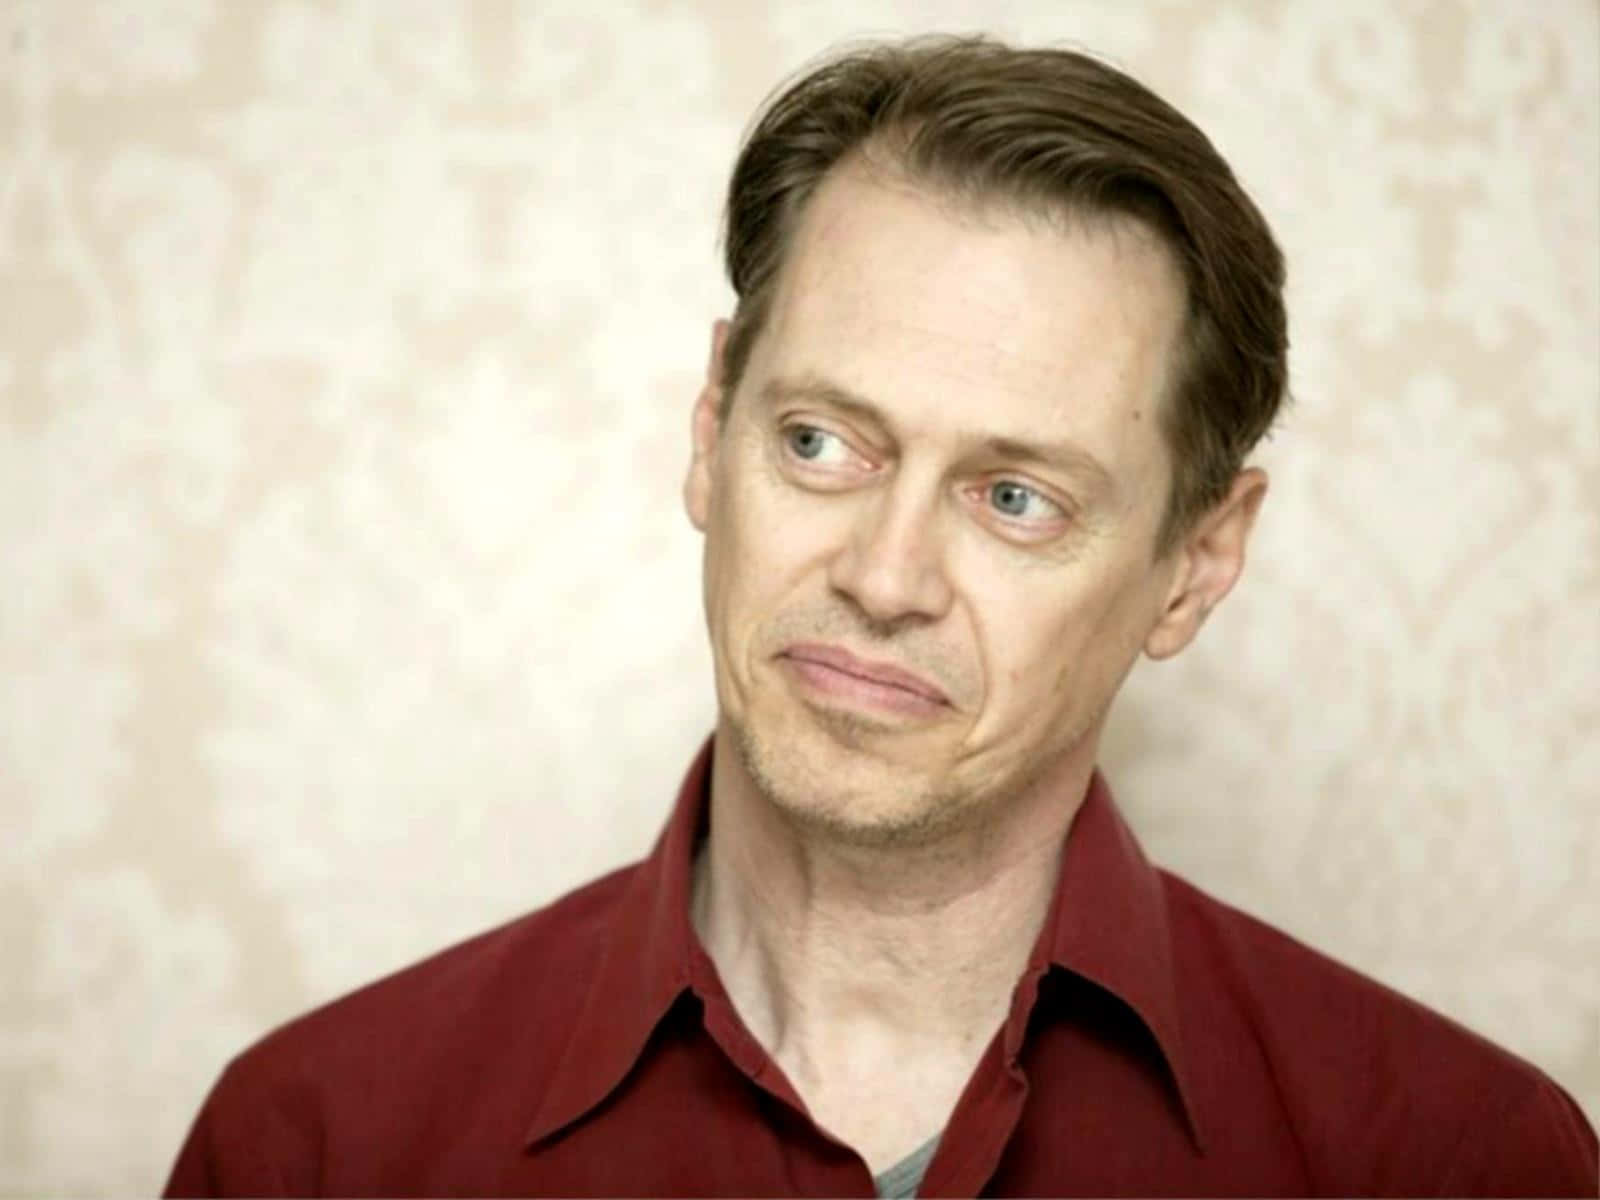 Veteran Hollywood Star Steve Buscemi In A Thoughtful Pose. Background